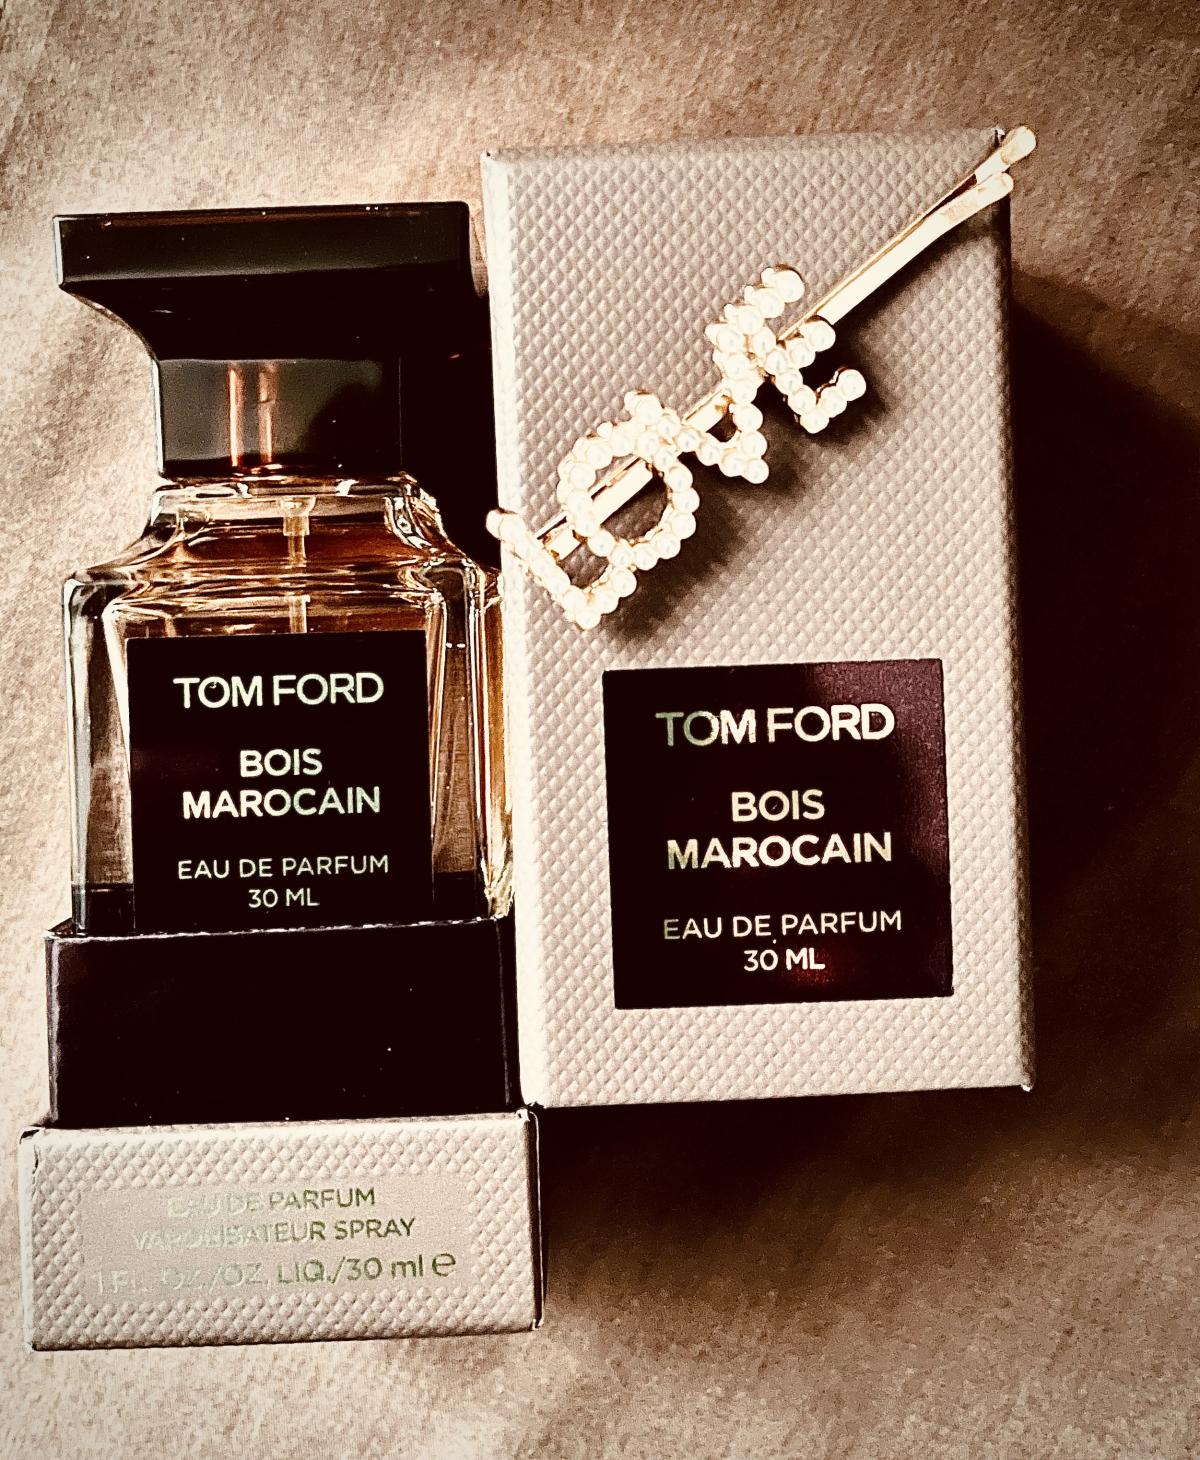 Bois Marocain (2022) Tom Ford perfume - a new fragrance for women and ...